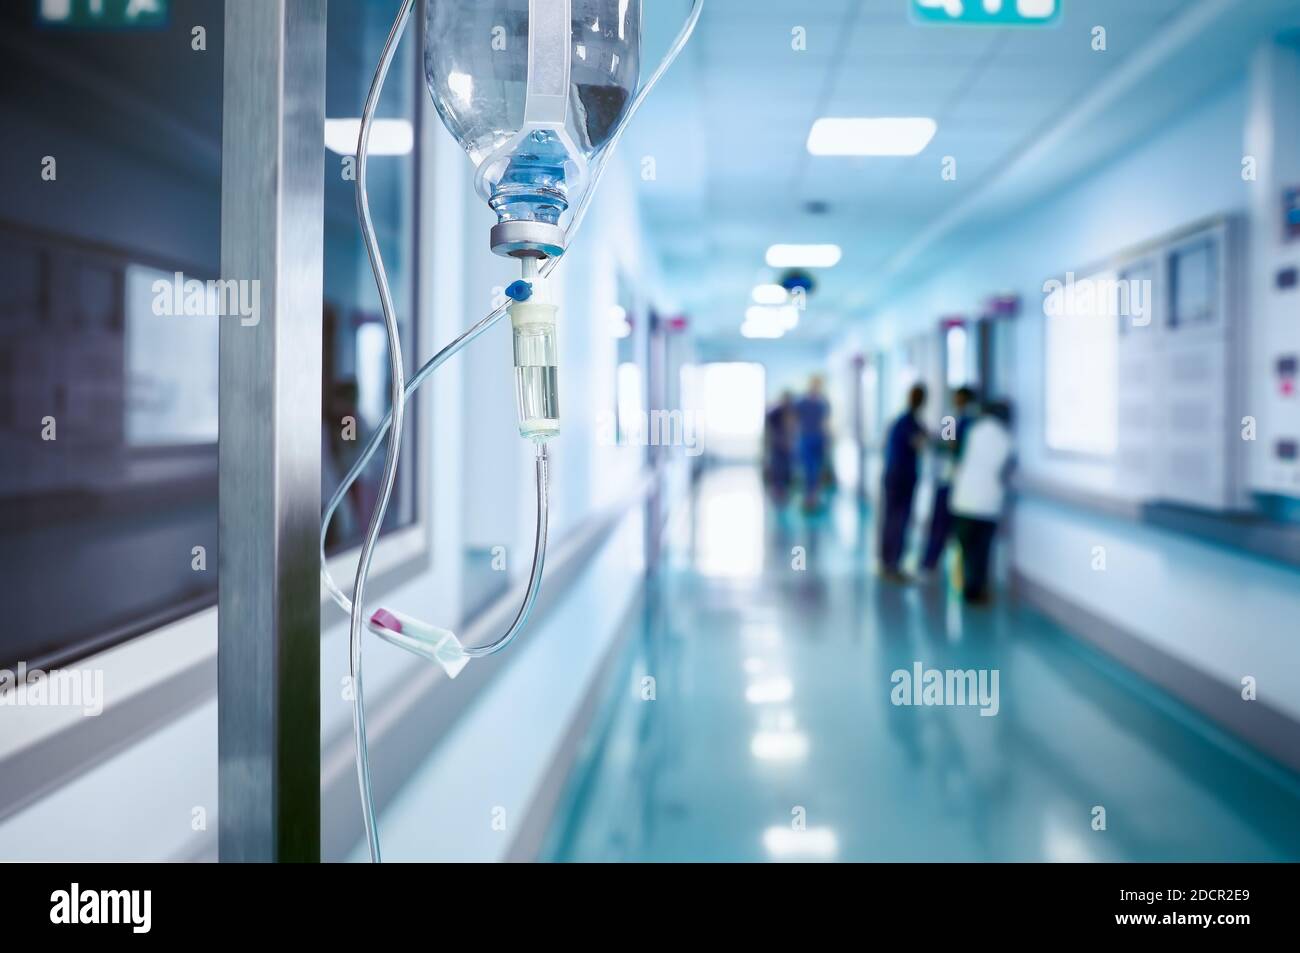 Intravenous drip in the hospital hallway on the background of blurred  staff. Stock Photo